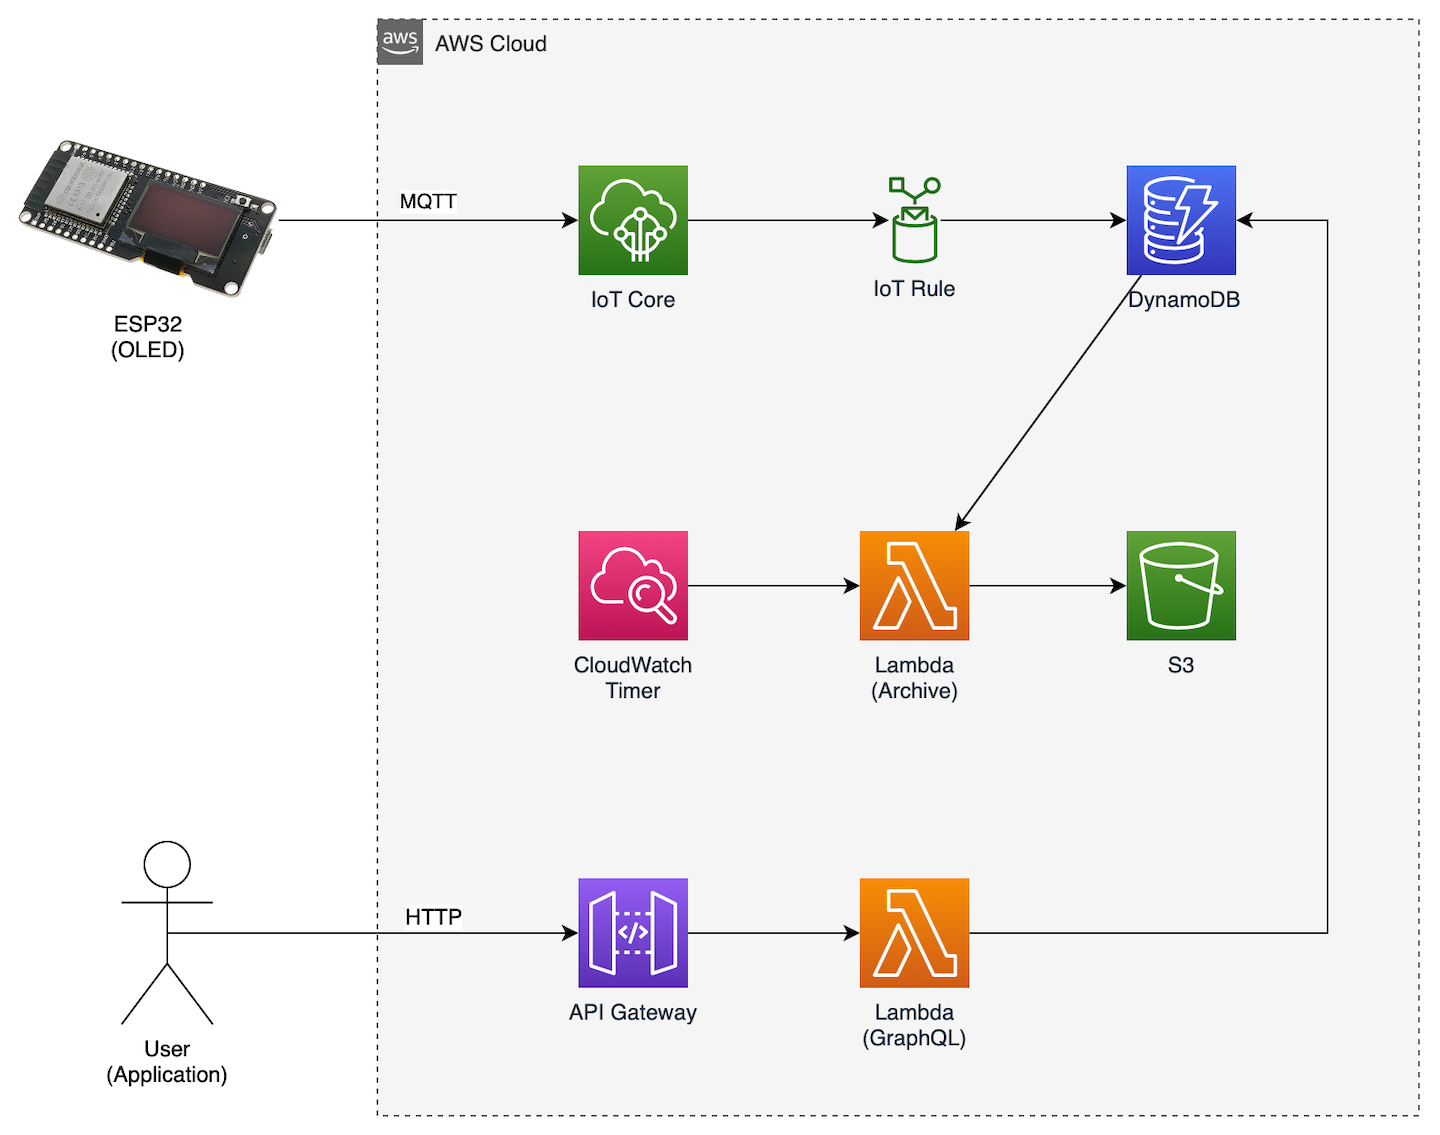 AWS architecture powering the energy monitor